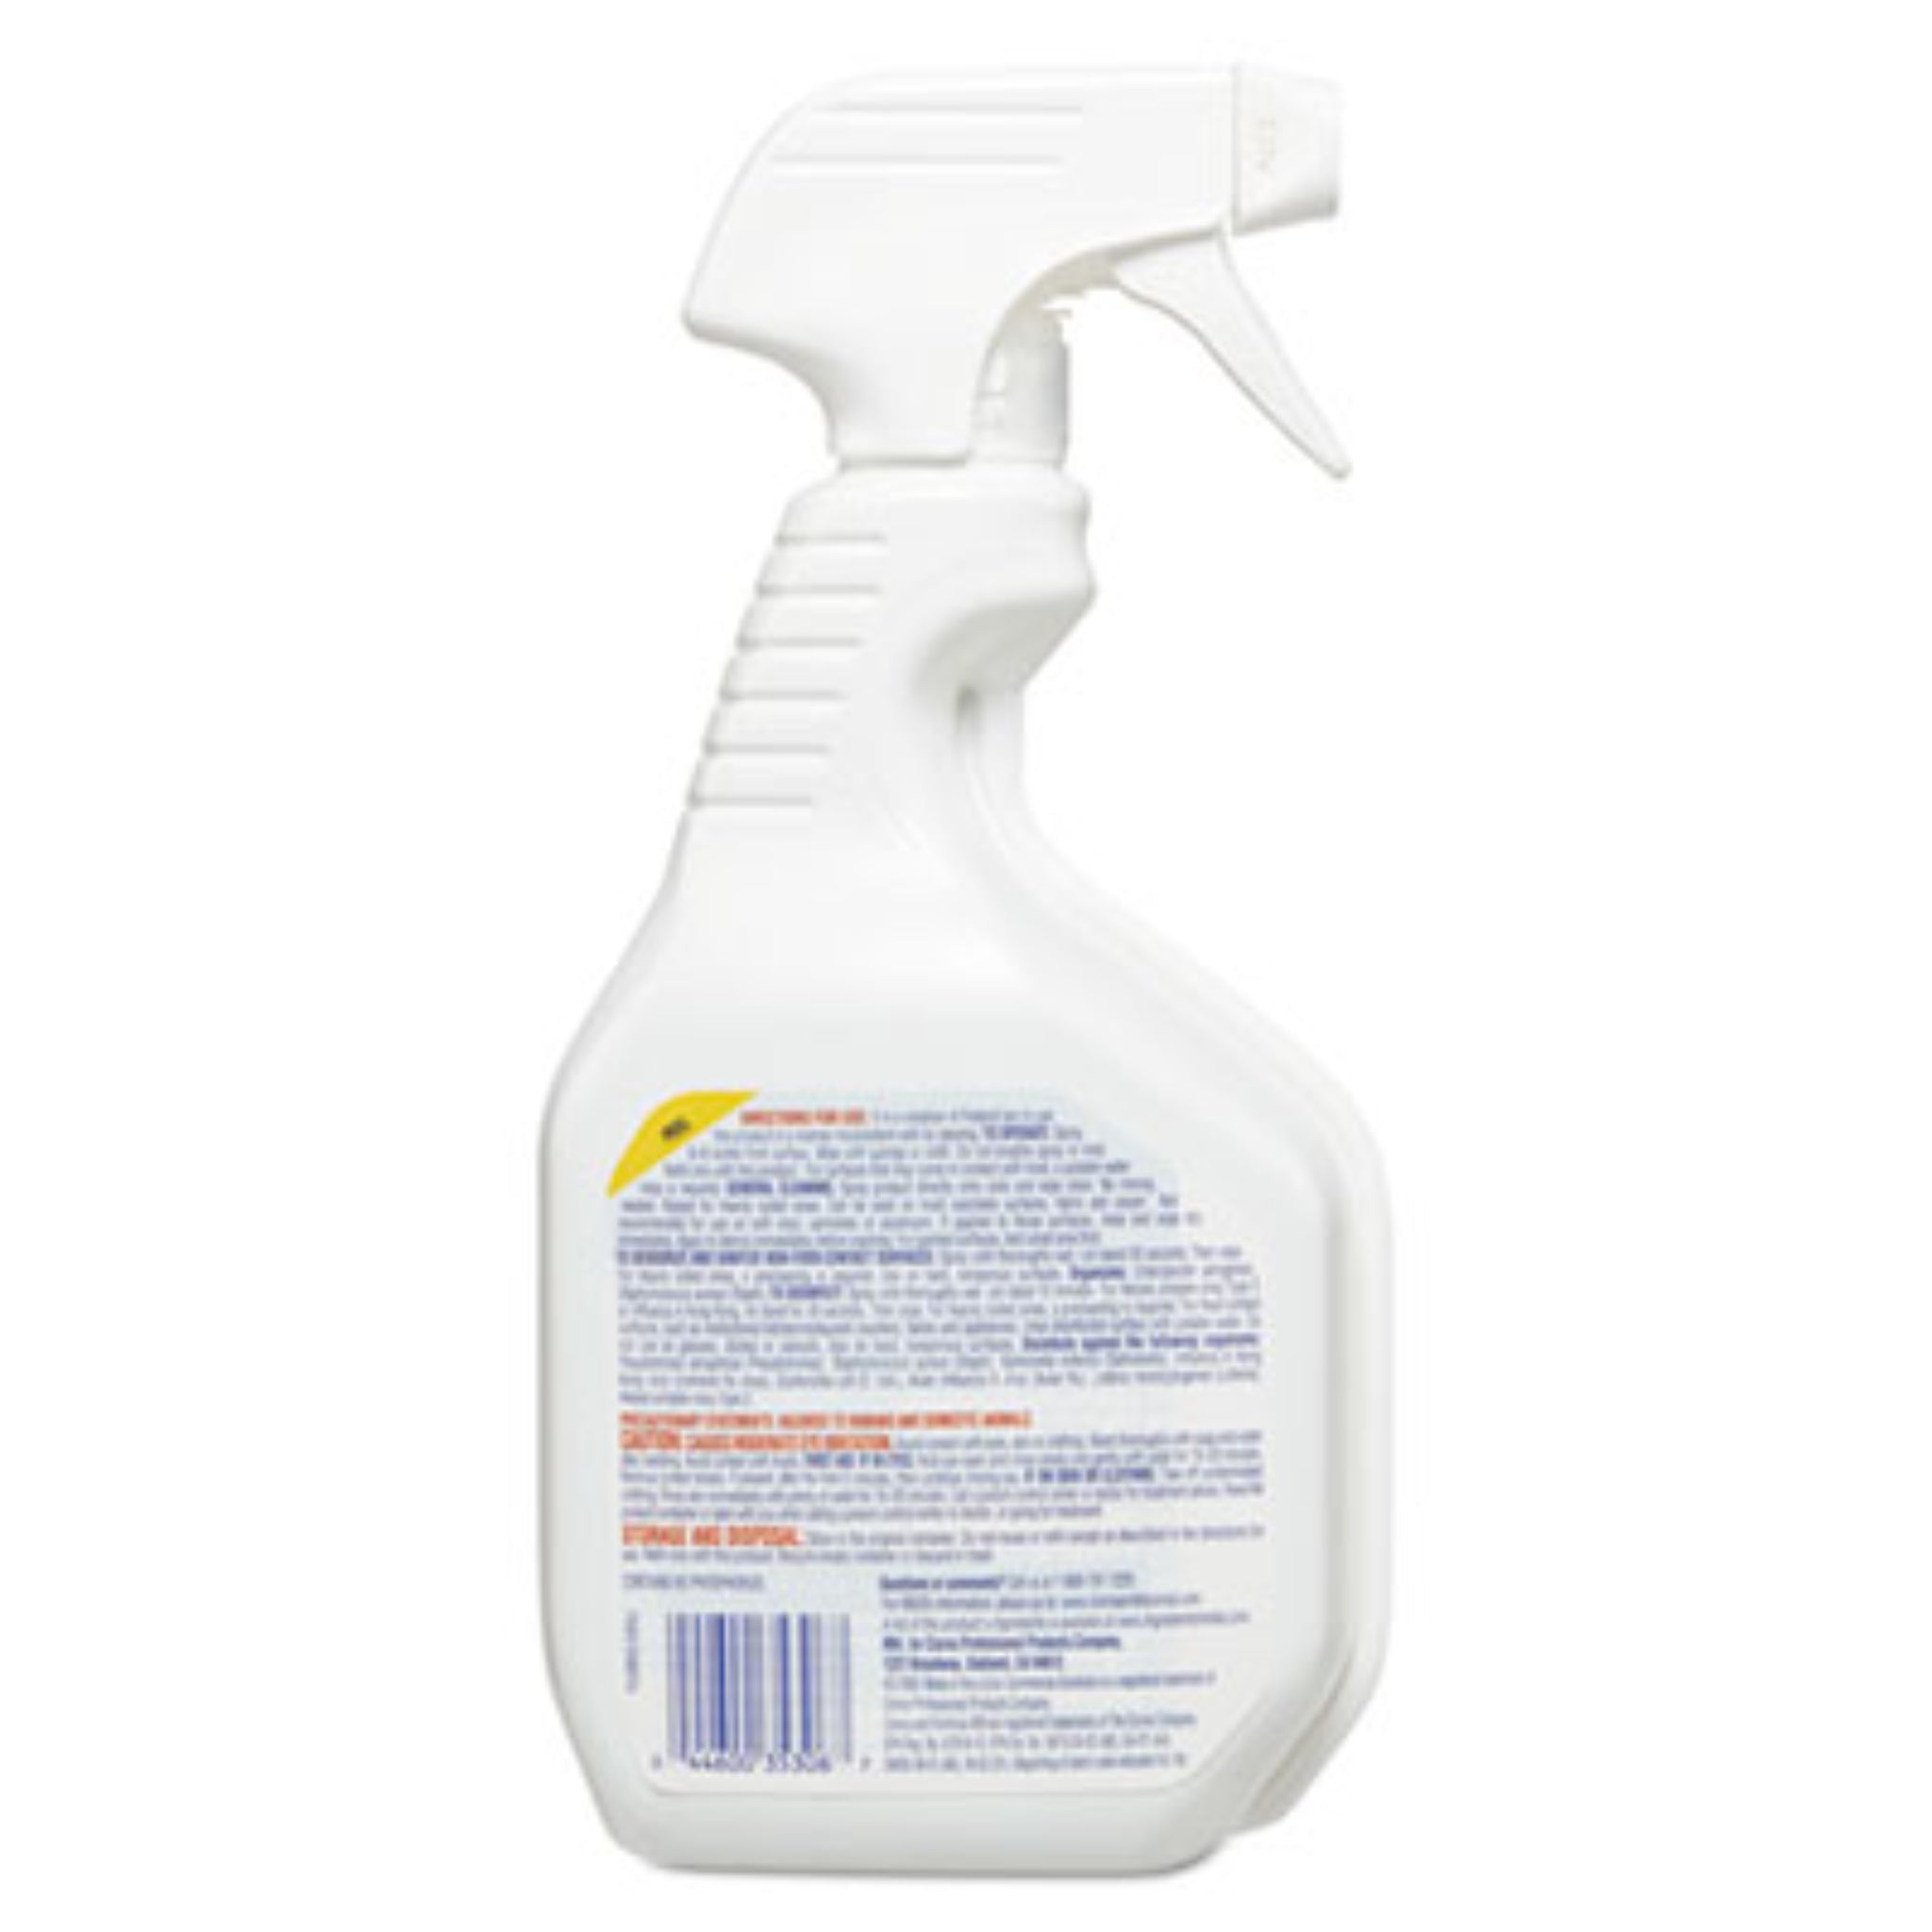 CLOROX SALES CO. CLO35306EA Cleaner Degreaser Disinfectant, Back View